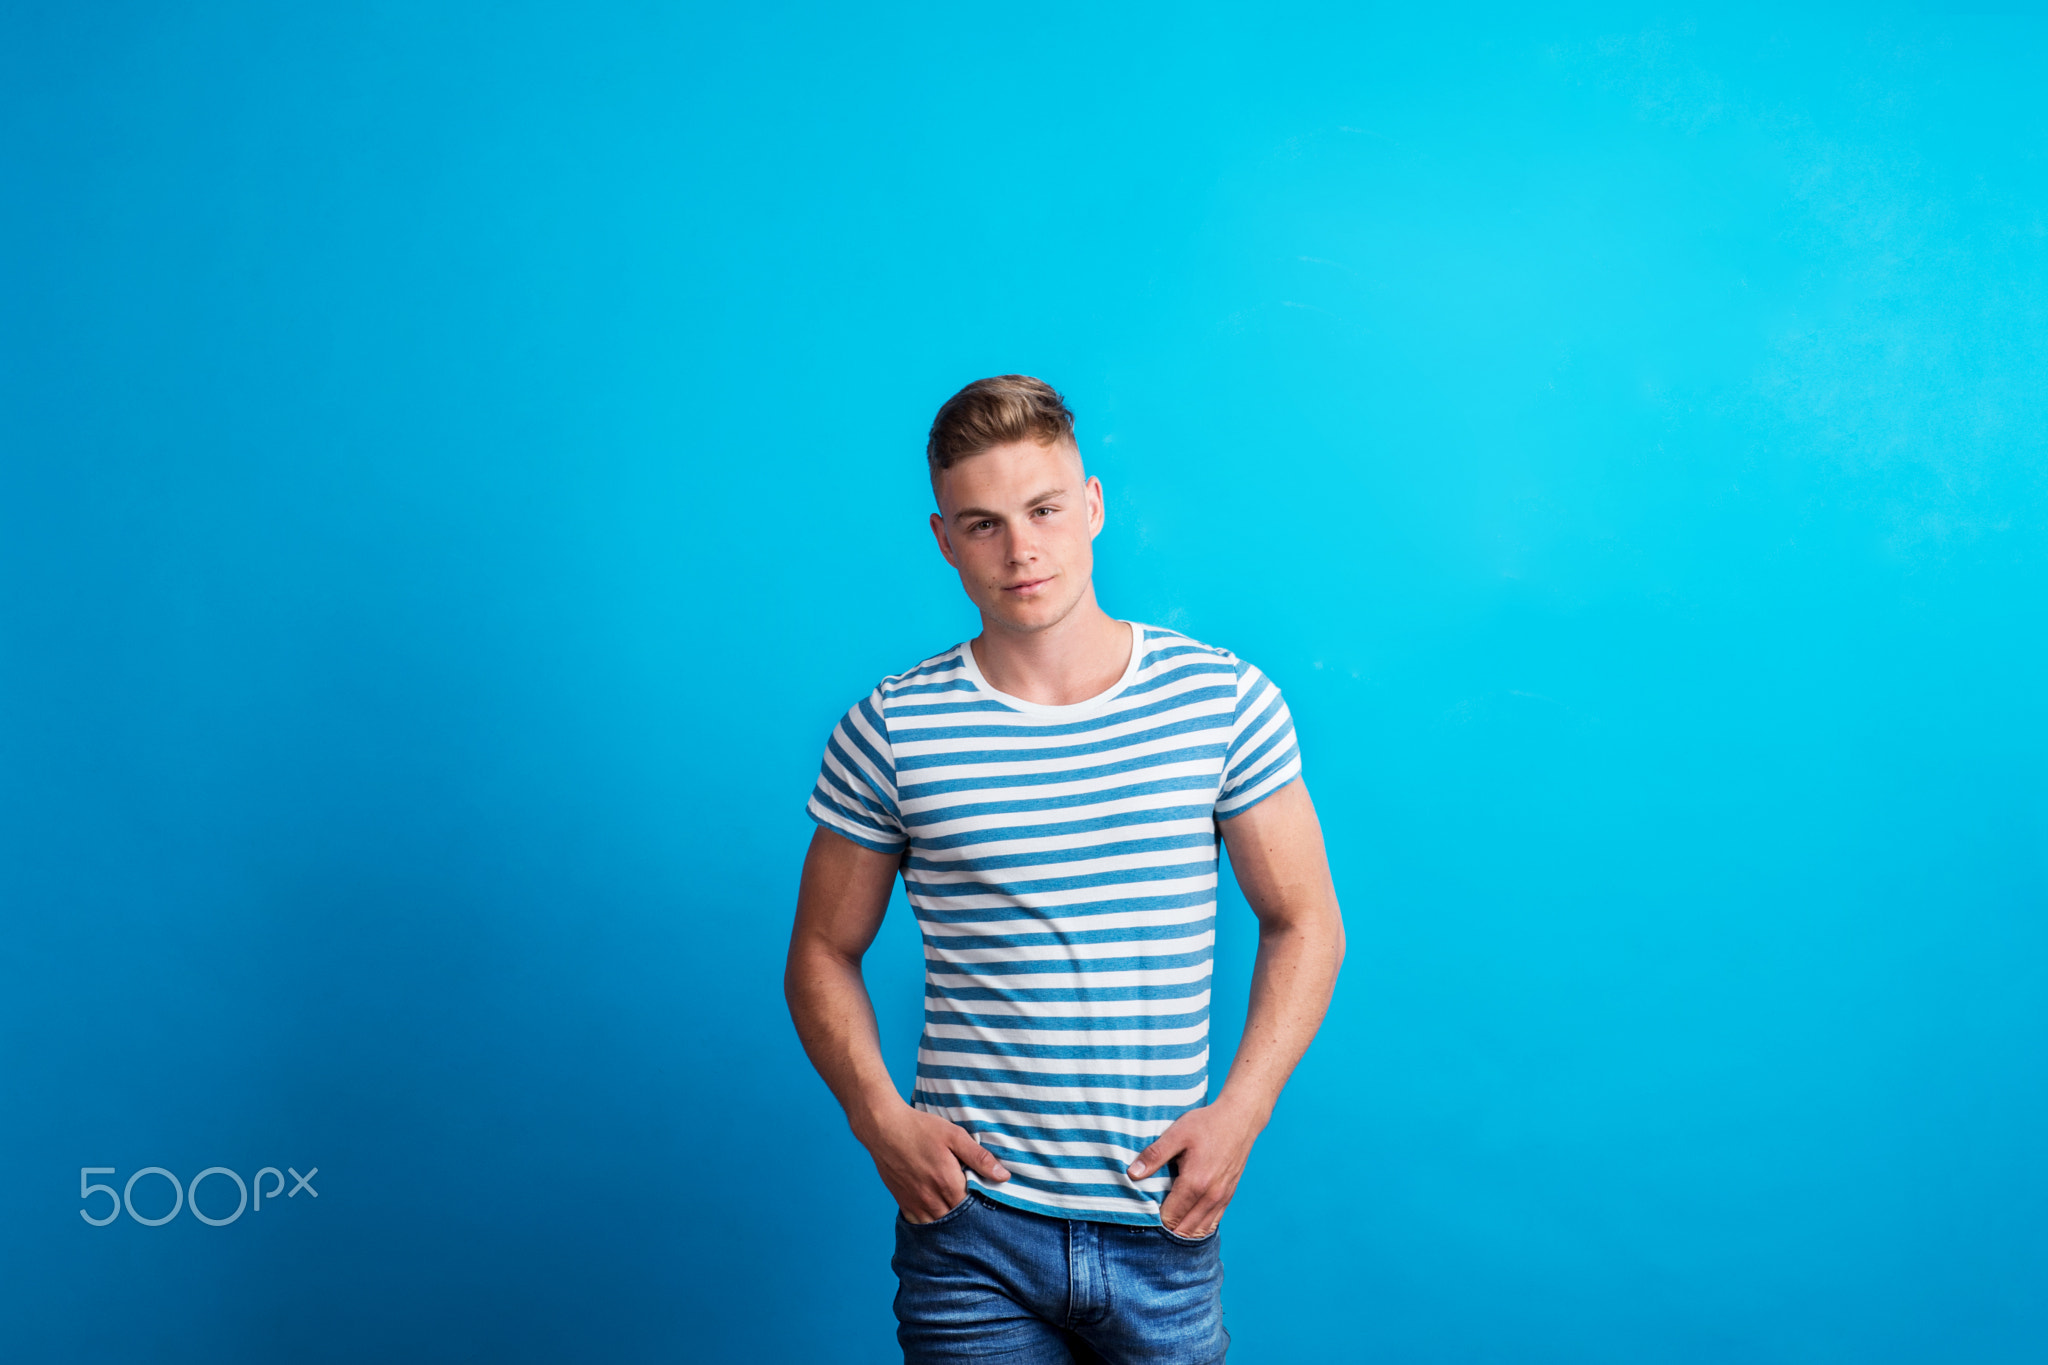 Portrait of a young man in a studio standing against blue background.